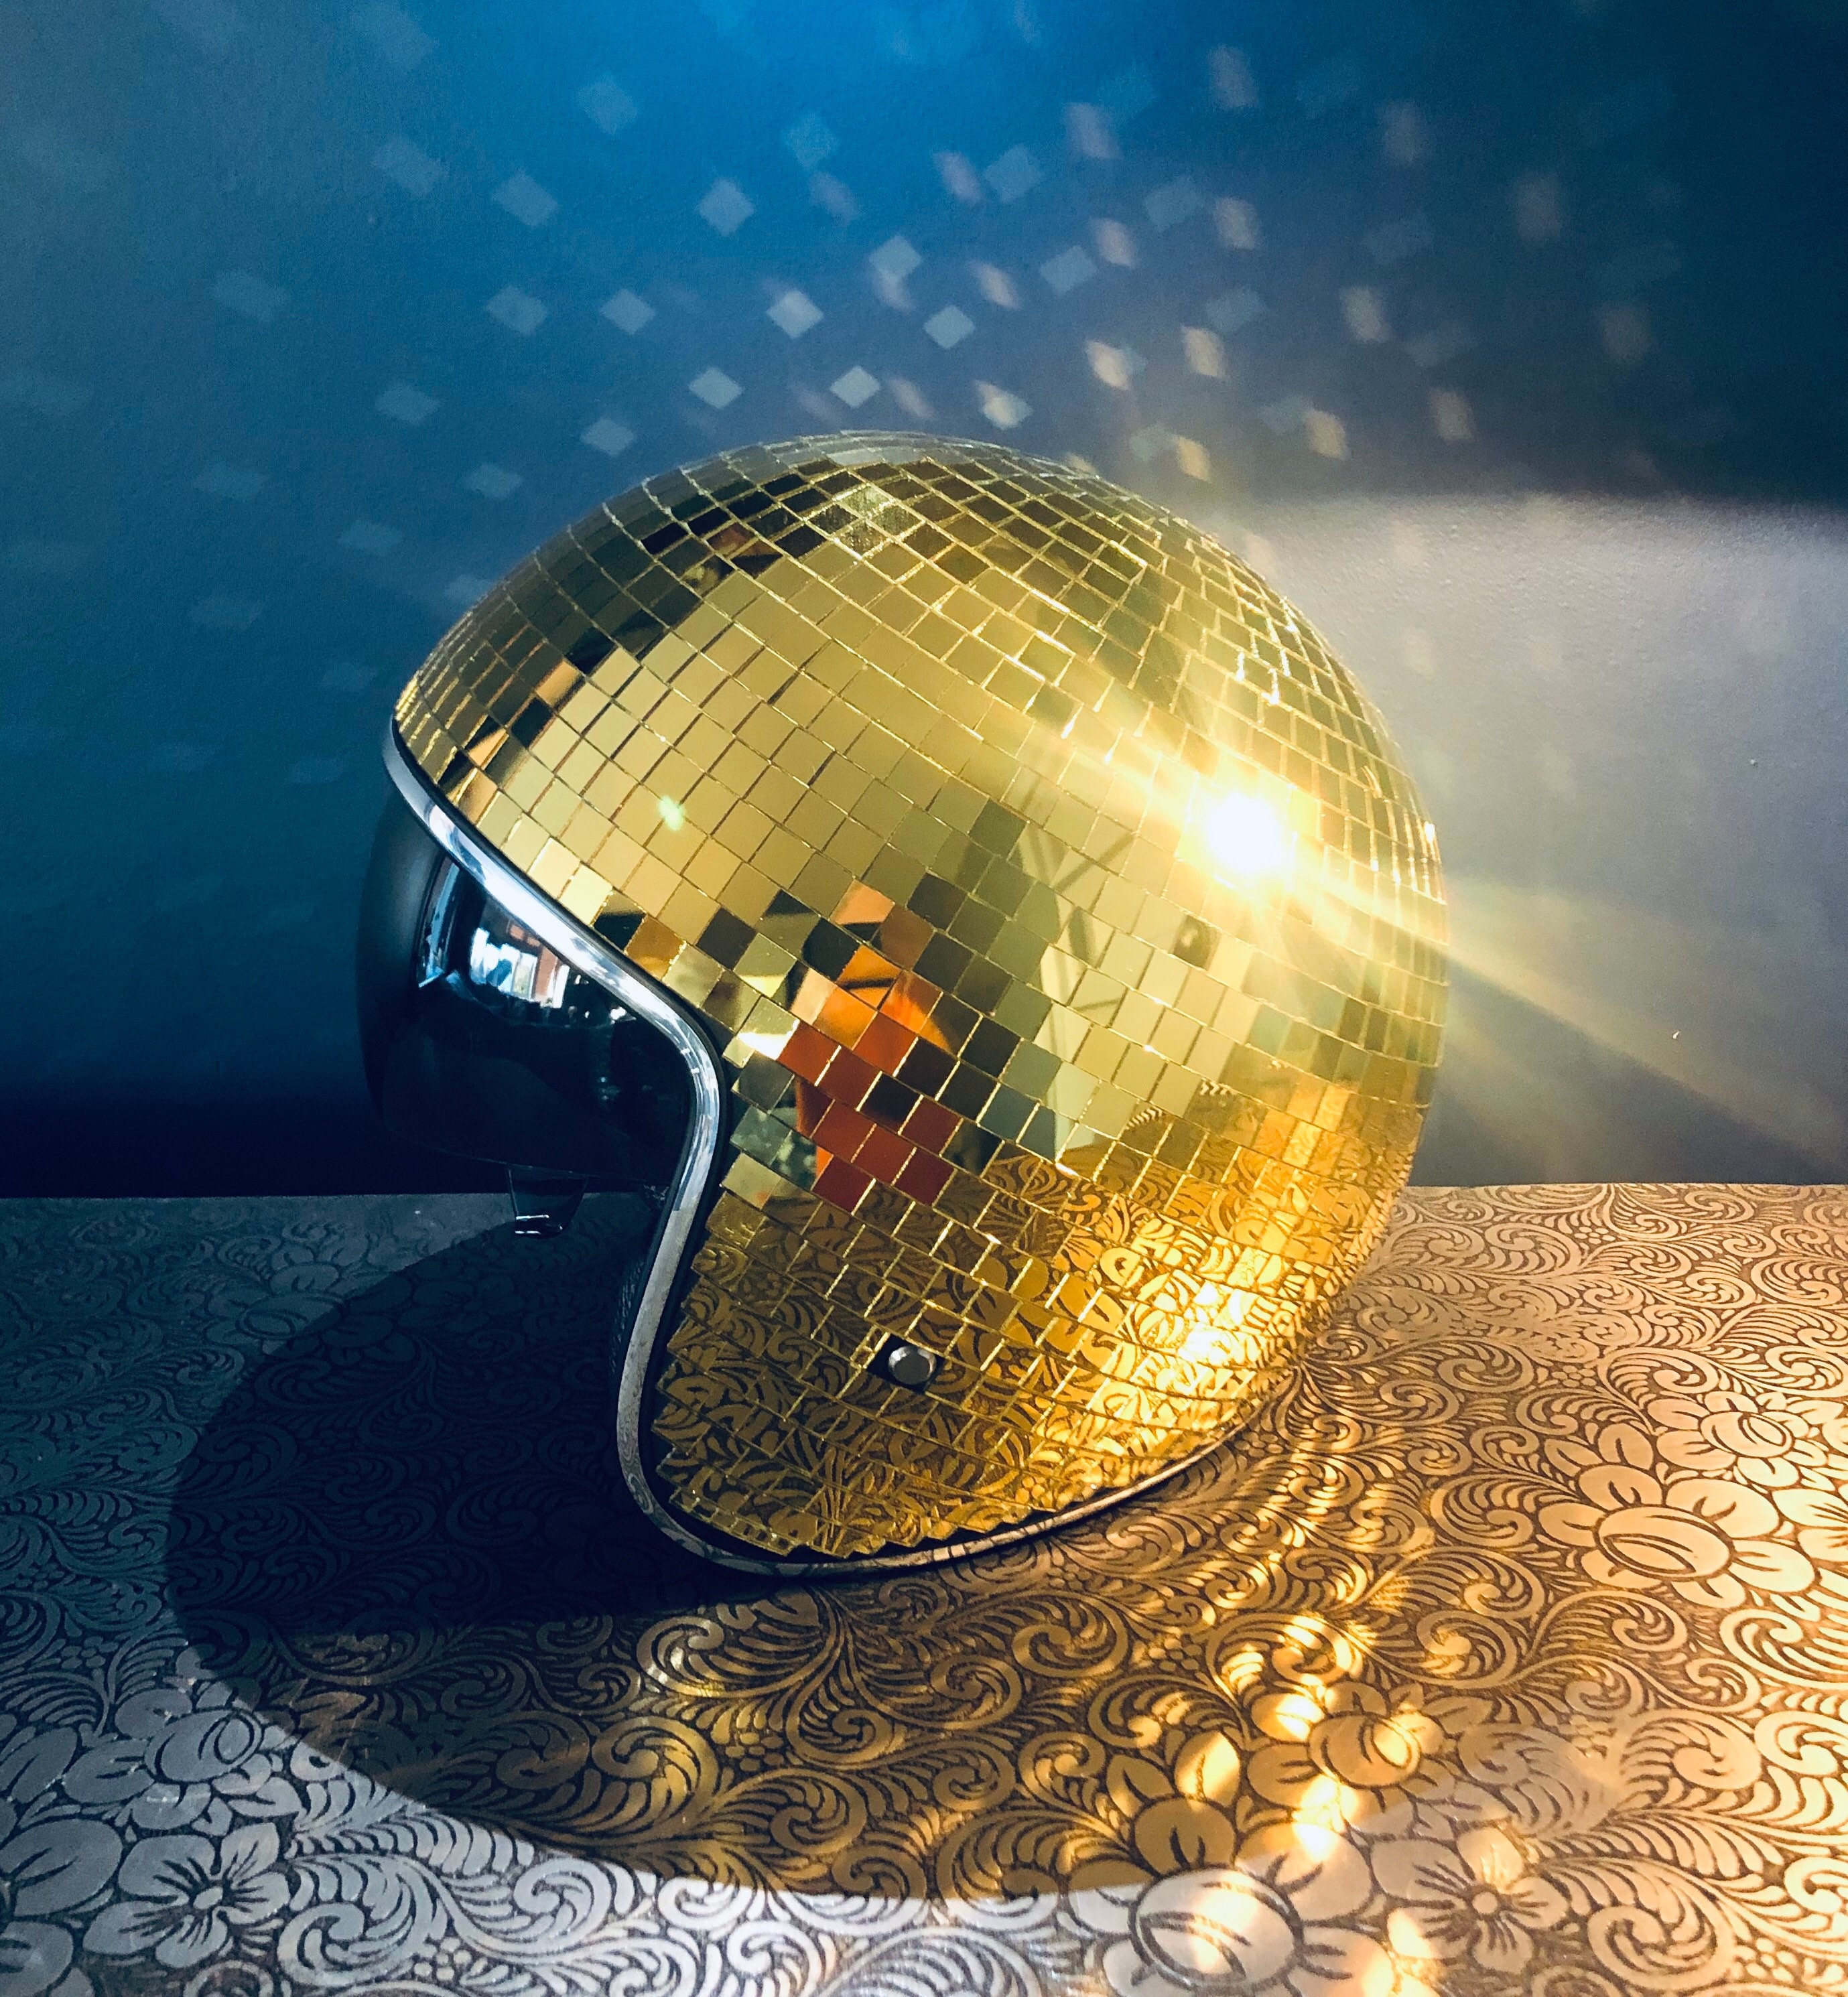 Disco ball Helmet Full GOLD with Retractable Visor. QUICK DELIVERY